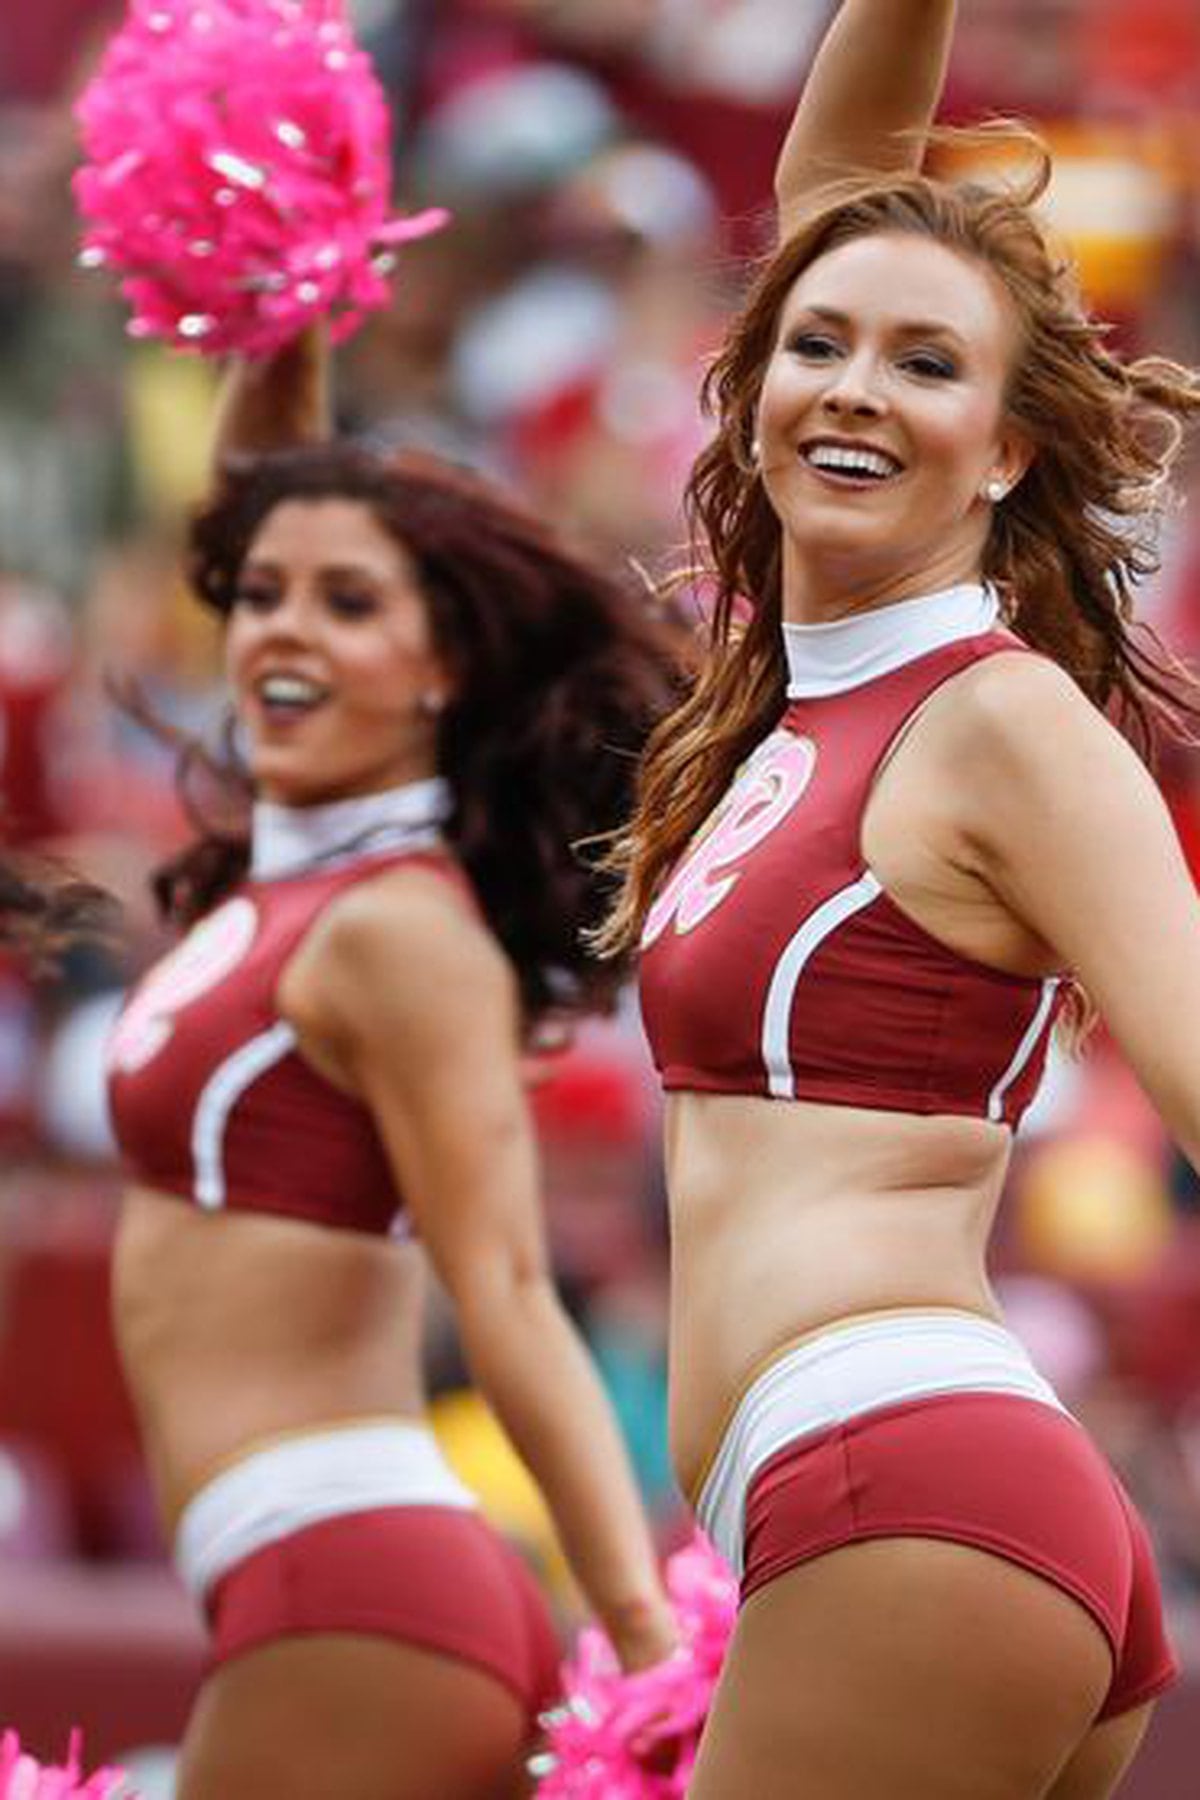 Best of Pictures of naked cheerleaders